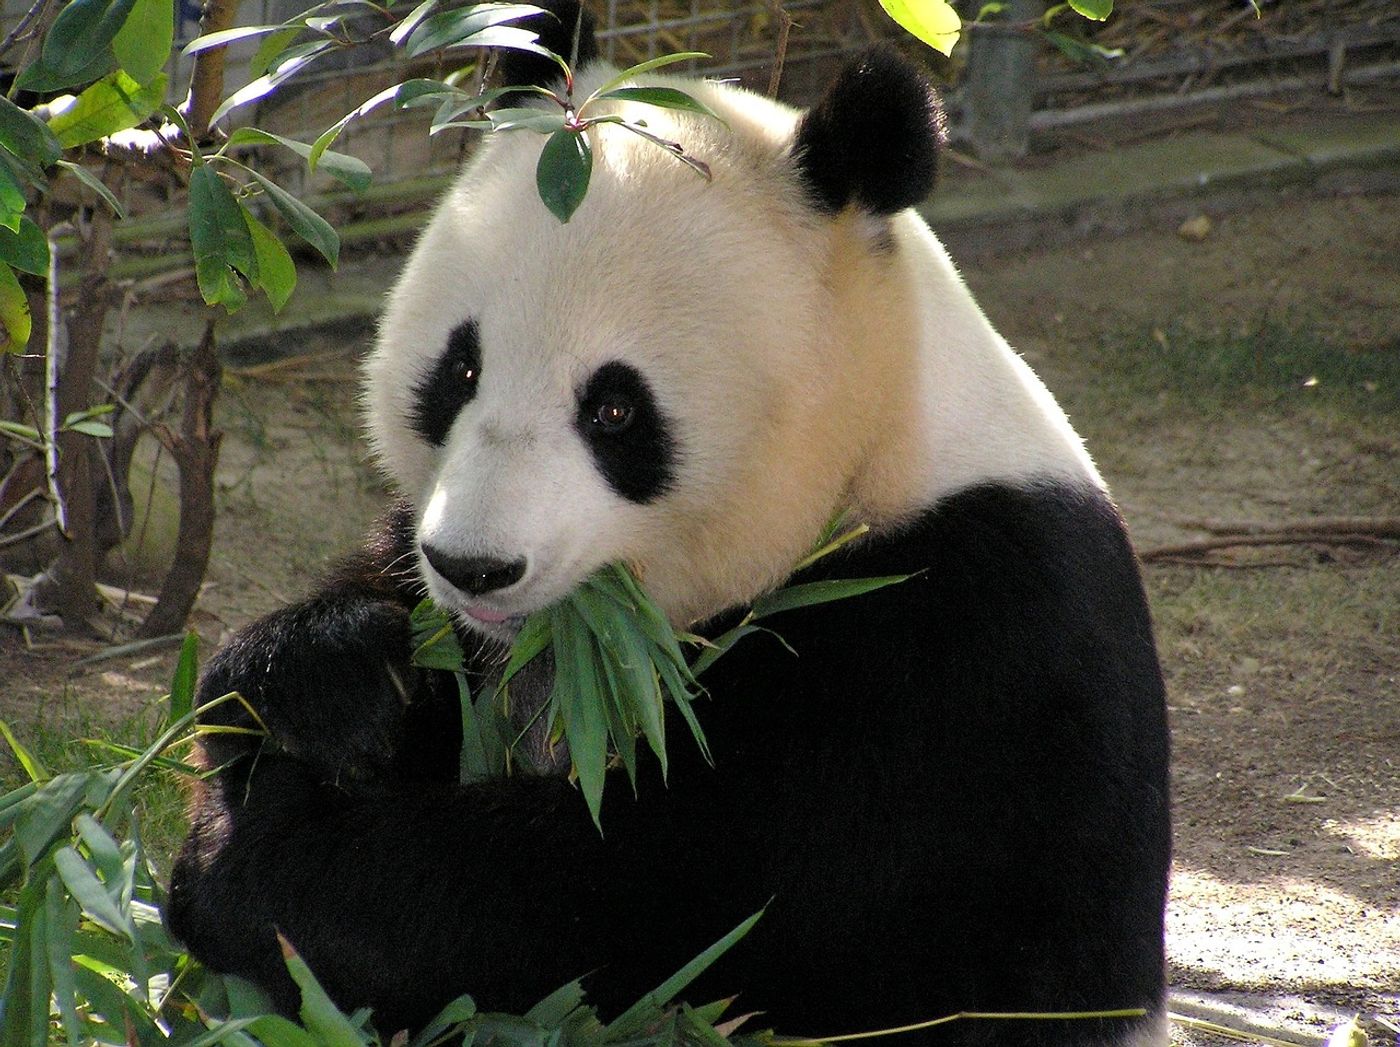 The oldest giant panda in captivity has passed away this week at age 37.